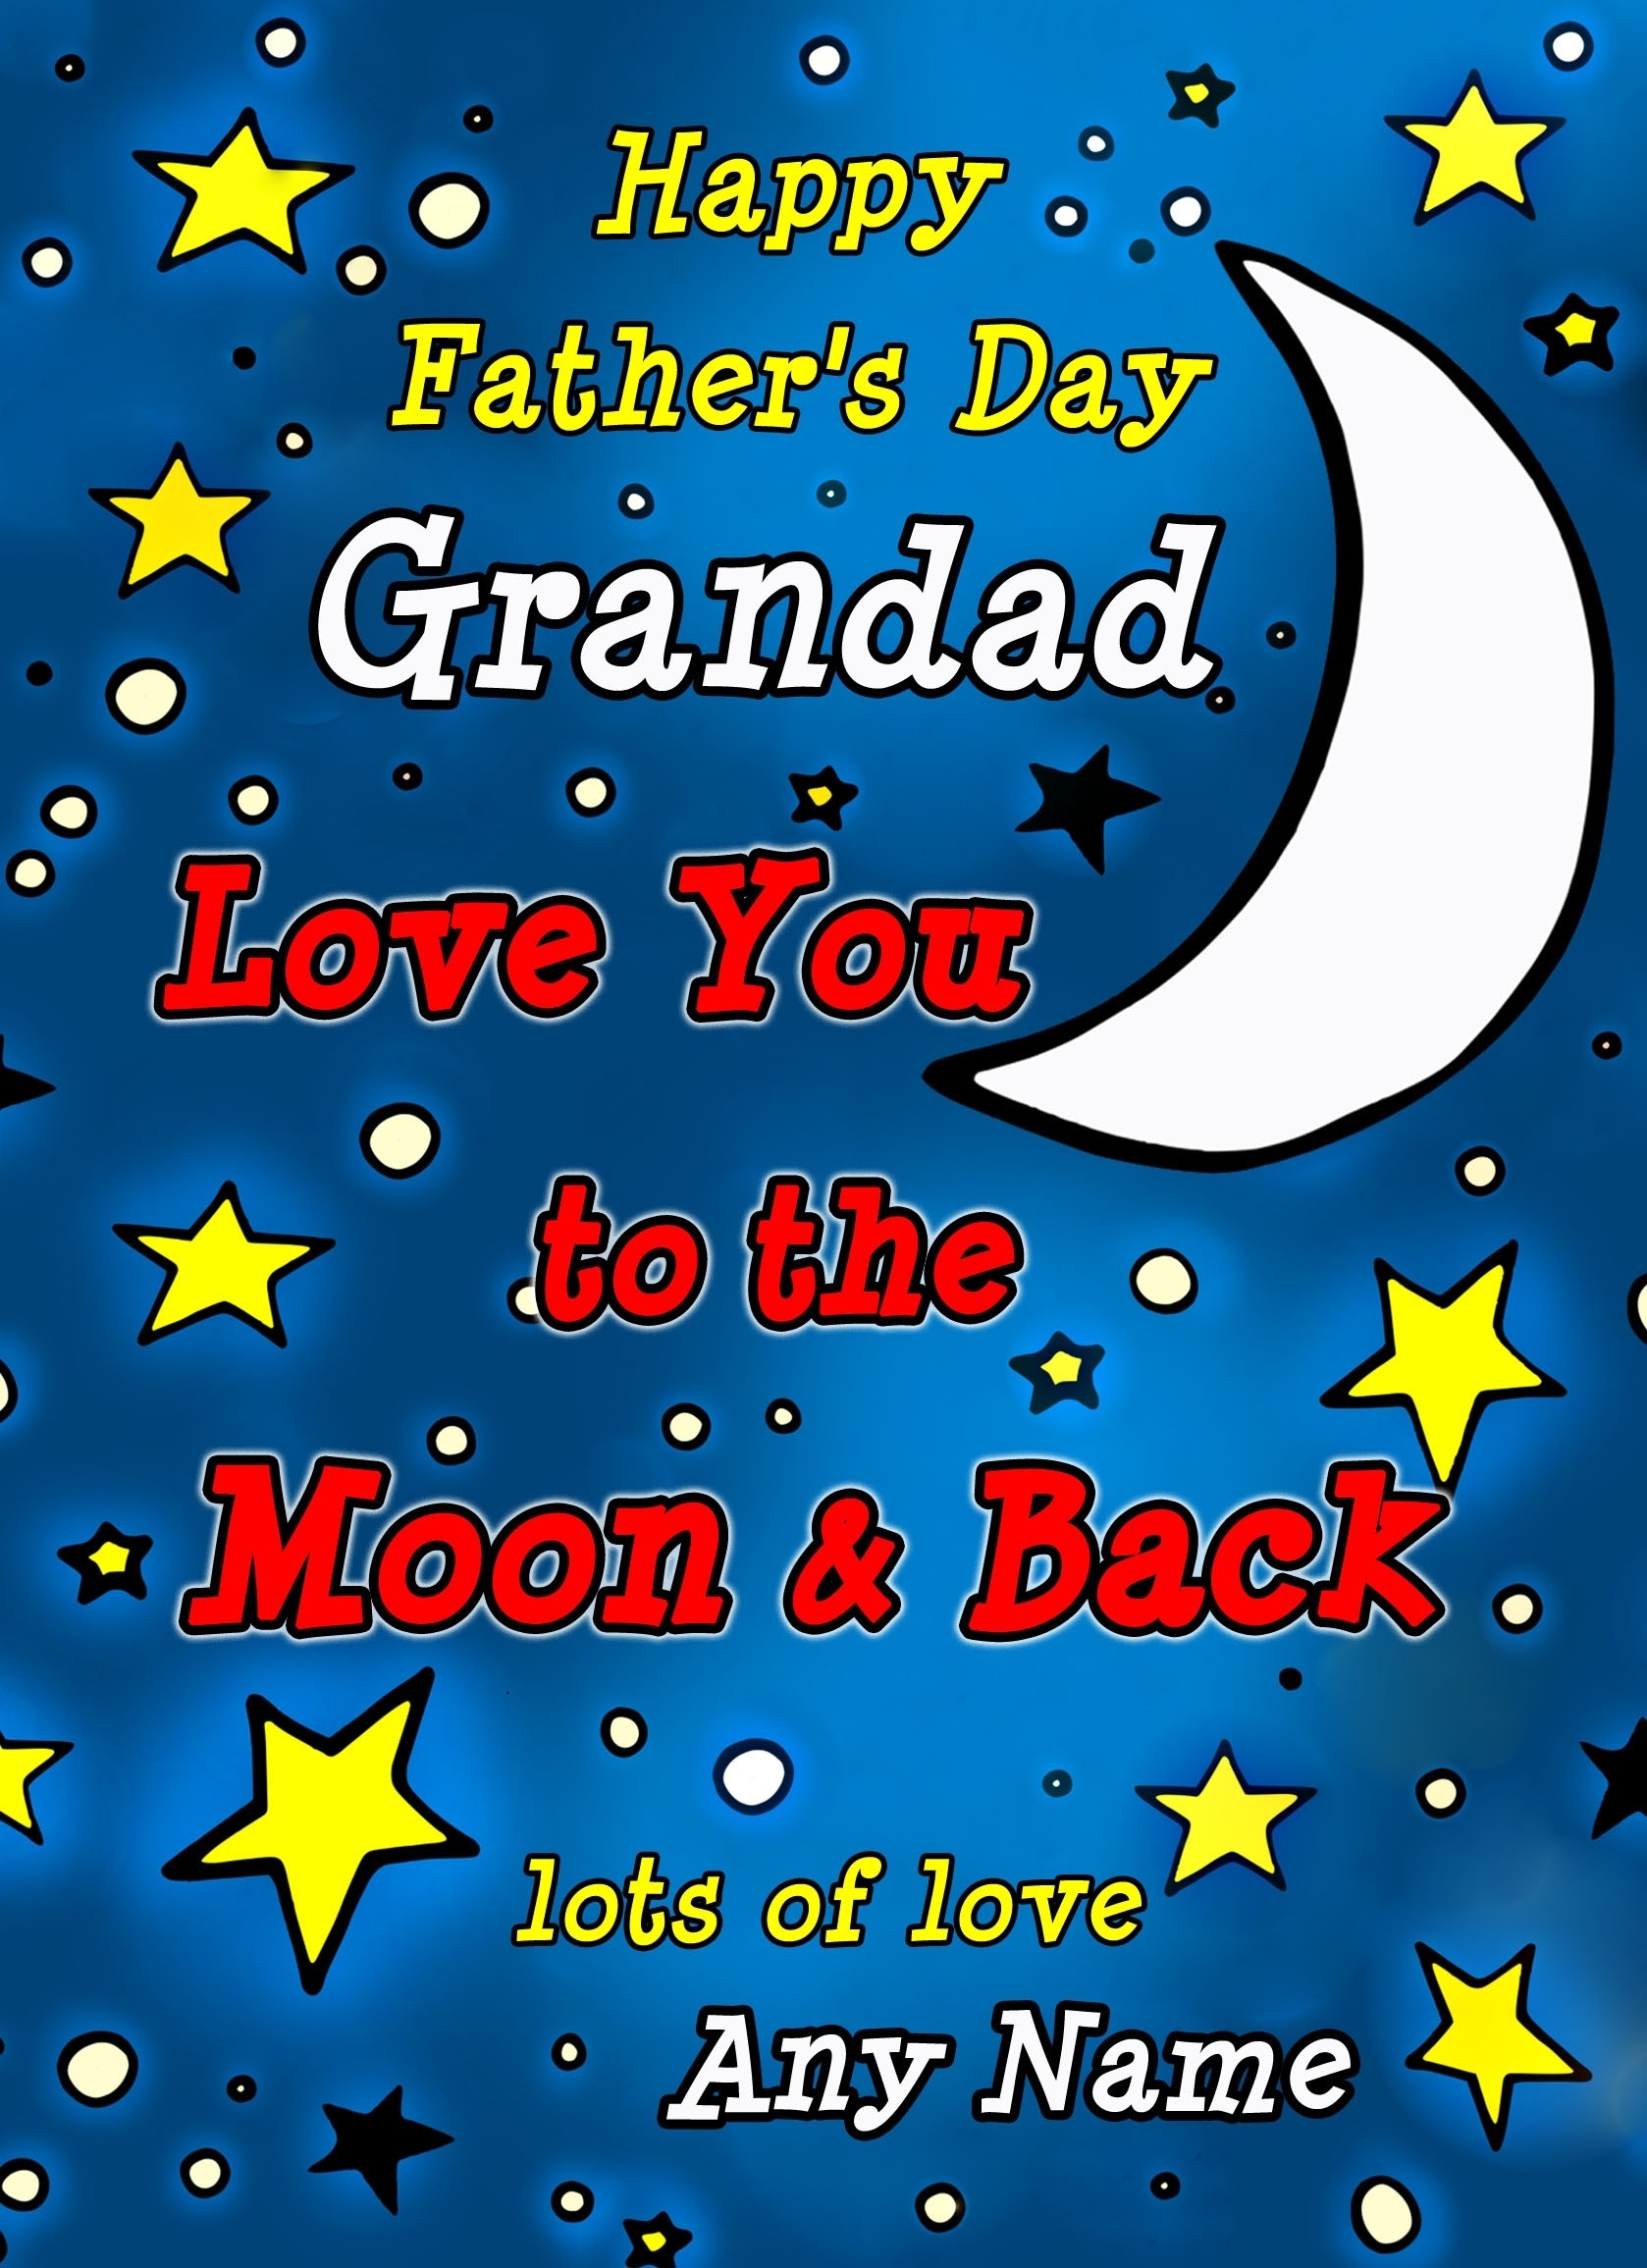 Personalised Fathers Day Card (Grandad, Moon & Back)